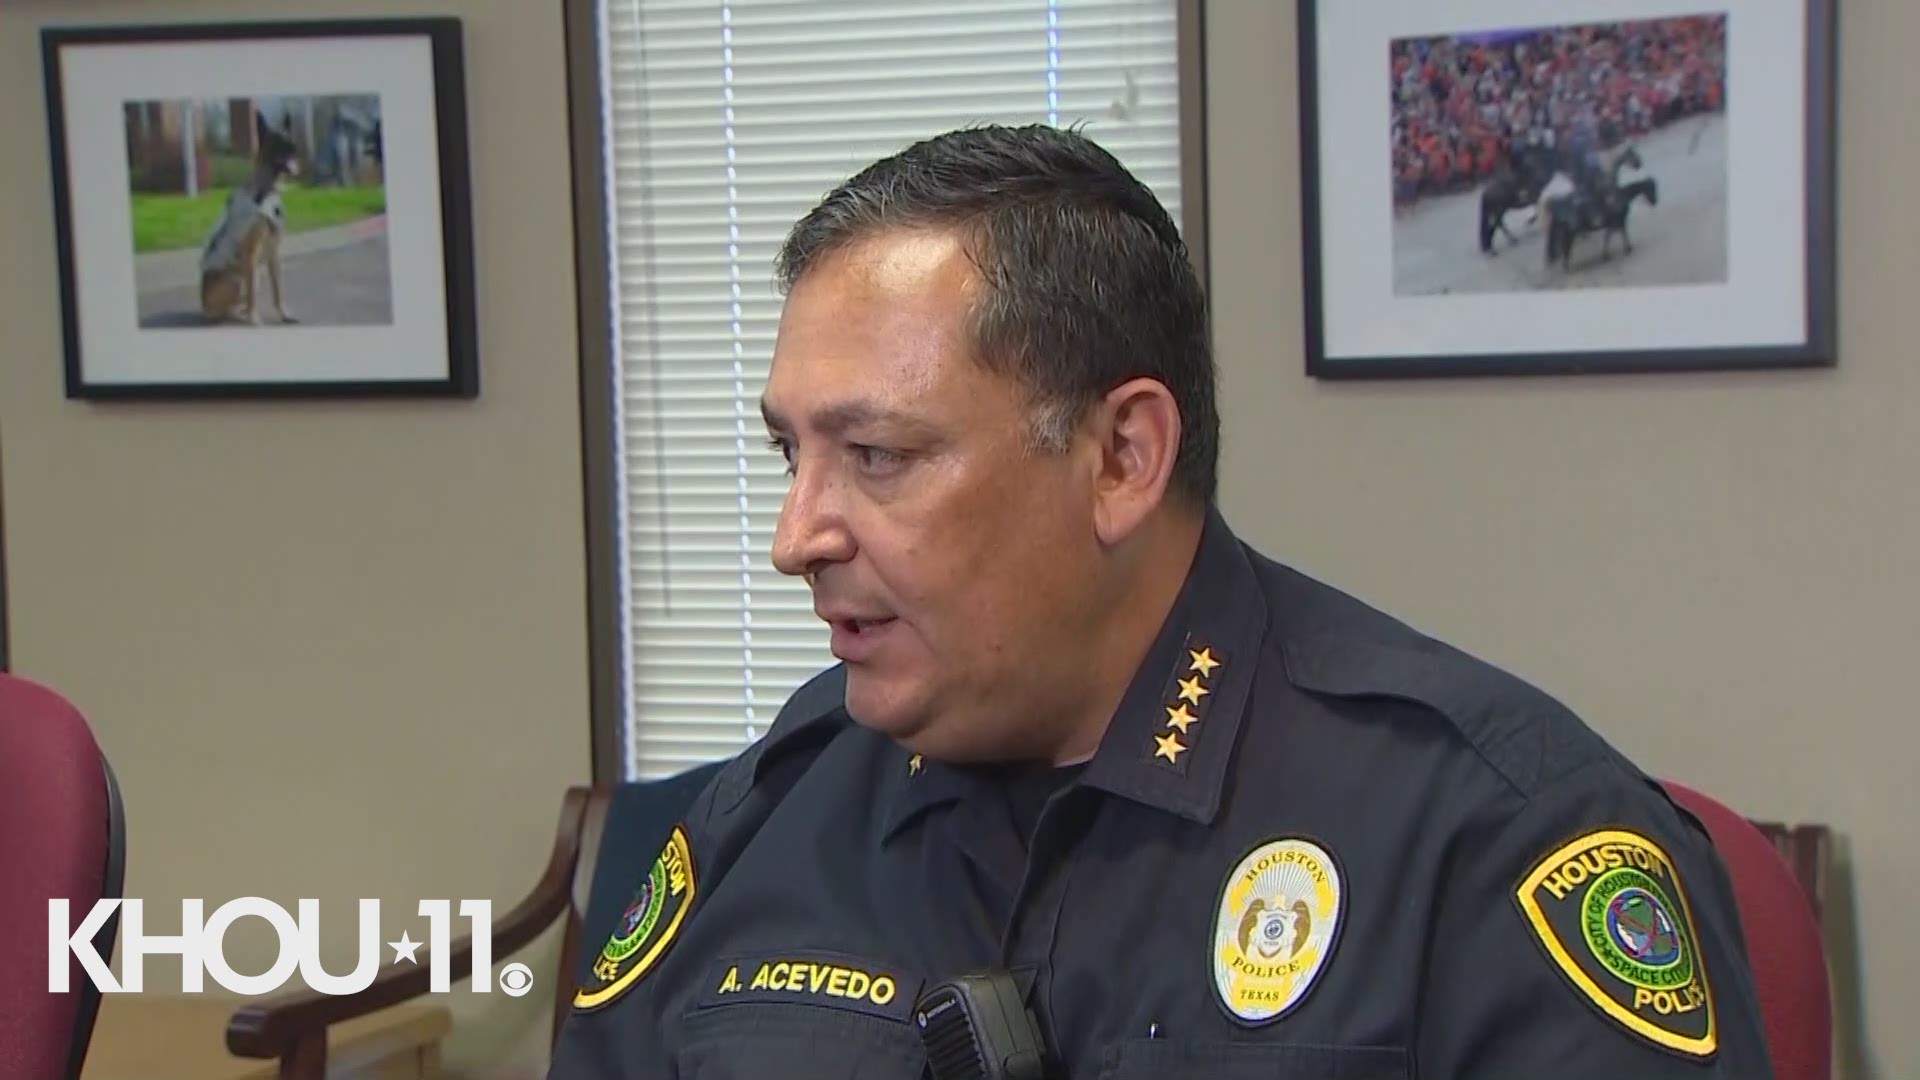 Houston Police Chief Art Acevedo said he is confident that he will bring justice to Maleah Davis and those that loved her.